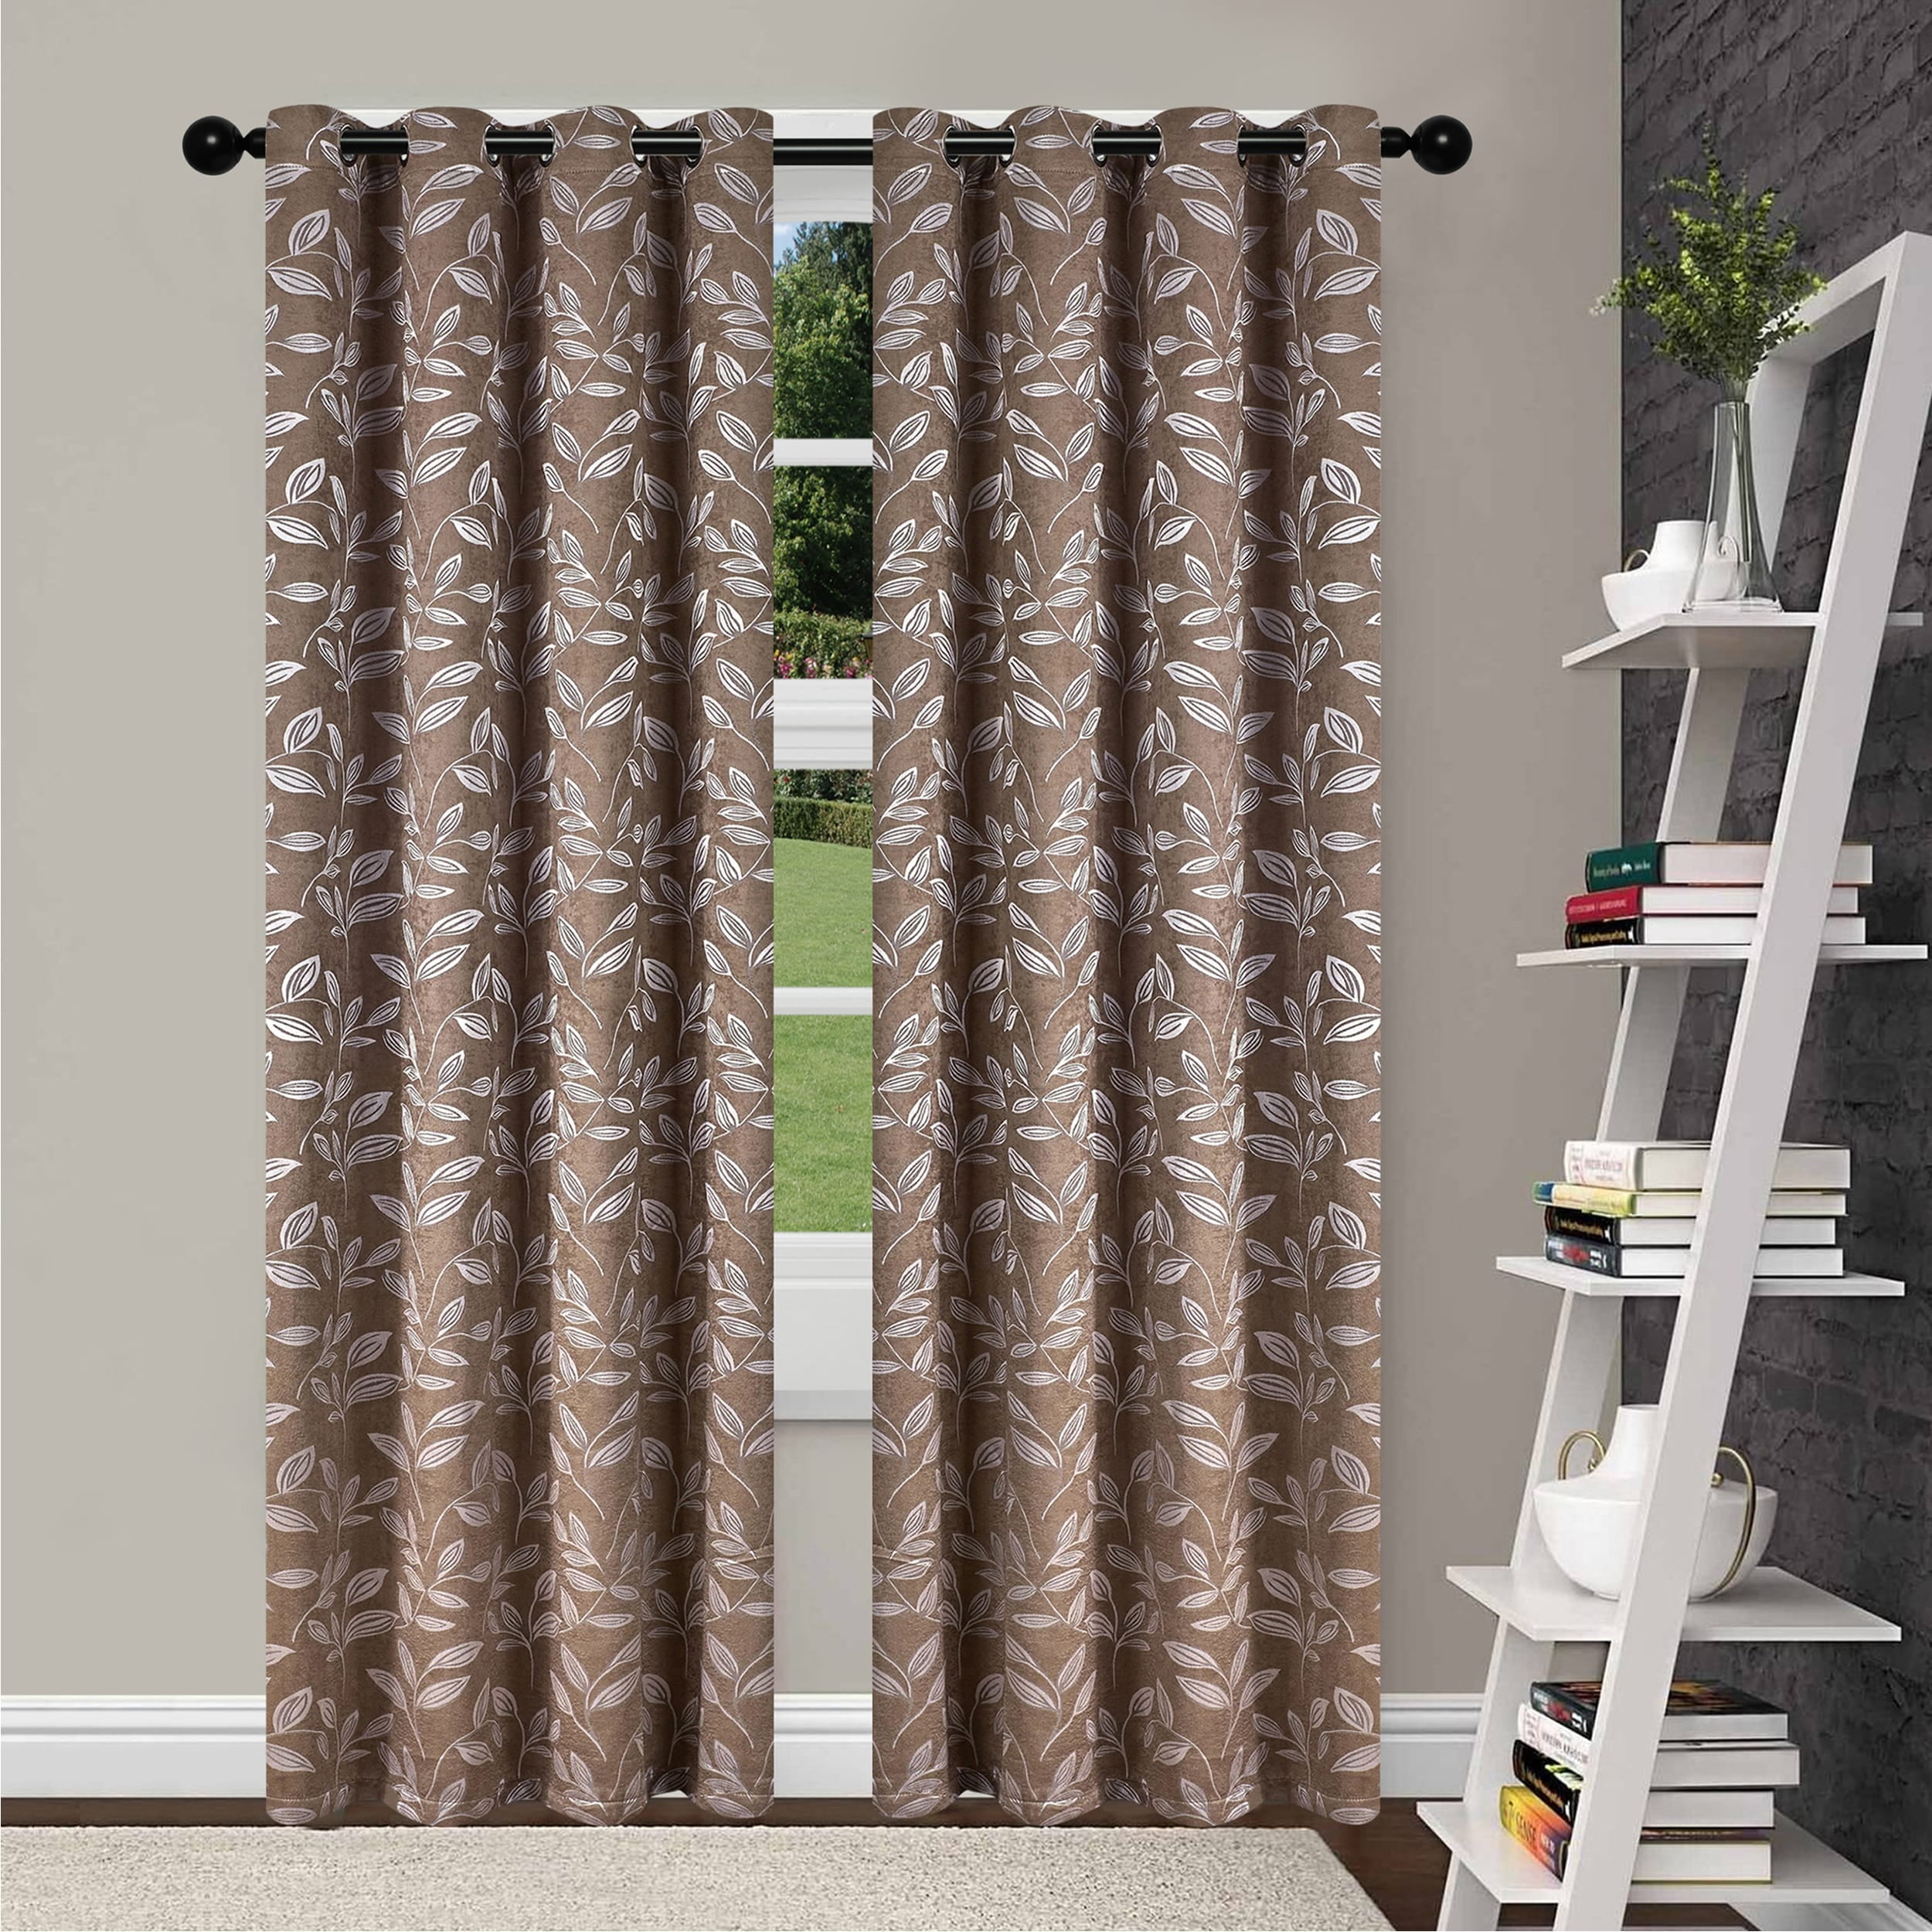 Superior Leaves Insulated Thermal Blackout Grommet Curtain Panel Pair